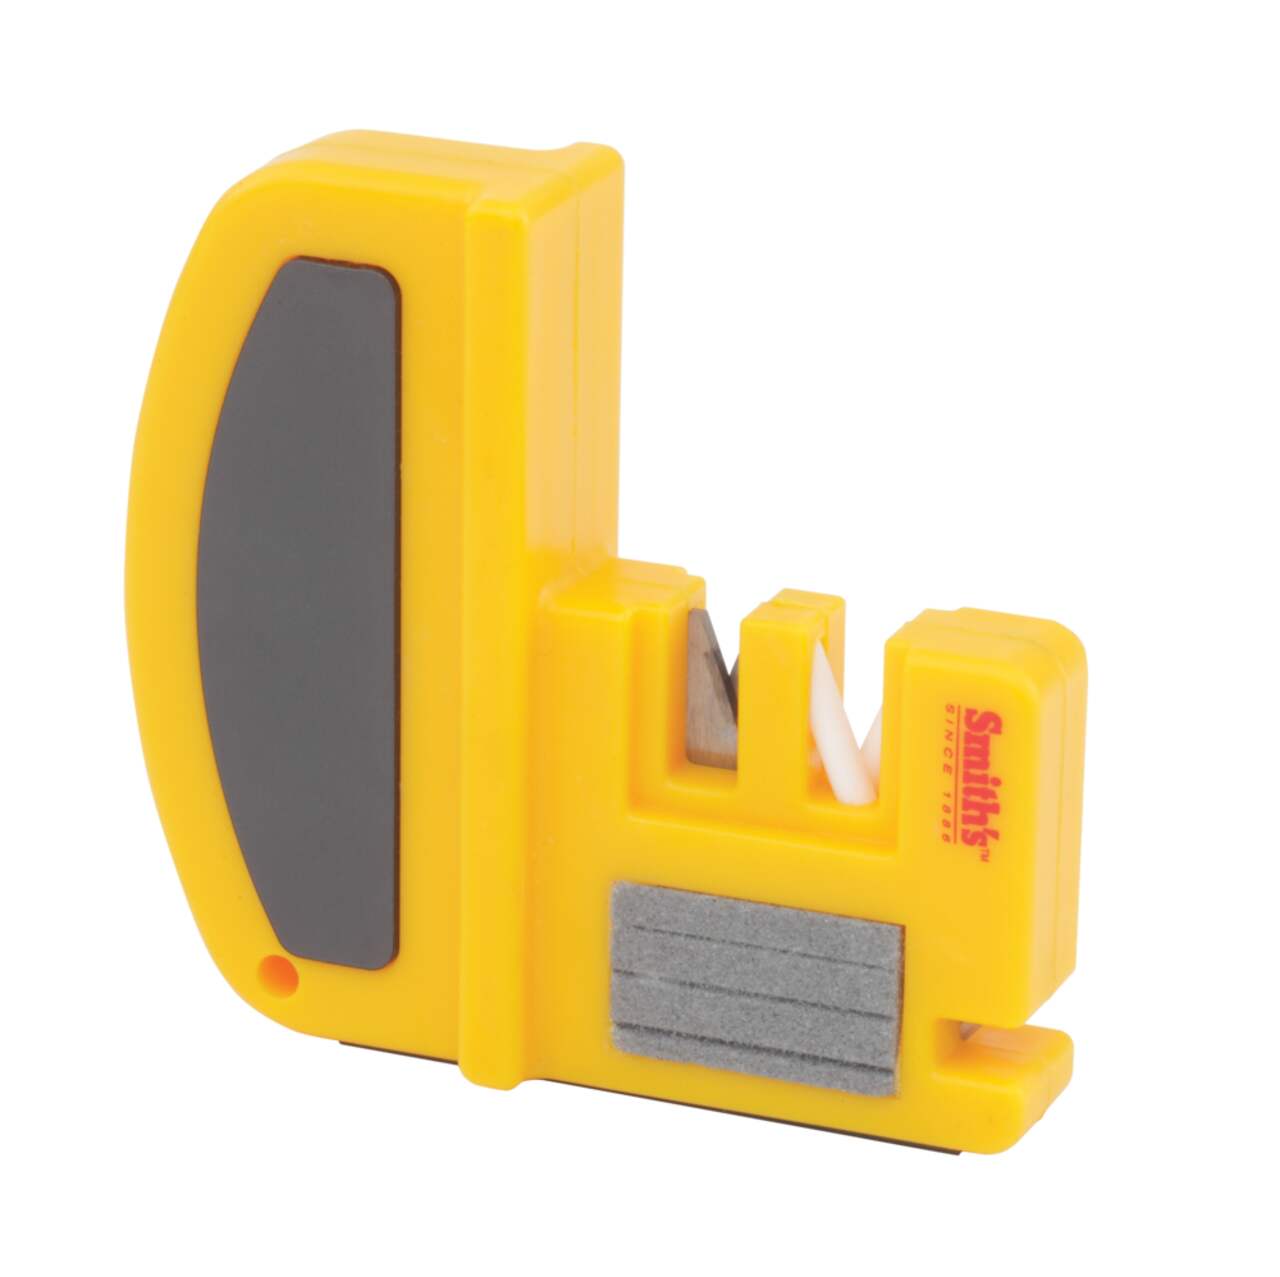 https://media-www.canadiantire.ca/product/playing/hunting/hunting-equipment/1756336/smith-s-deluxe-knife-hook-sharpener-a8b6f544-3e90-4d34-b9f7-e9fcecaf5613.png?imdensity=1&imwidth=640&impolicy=mZoom